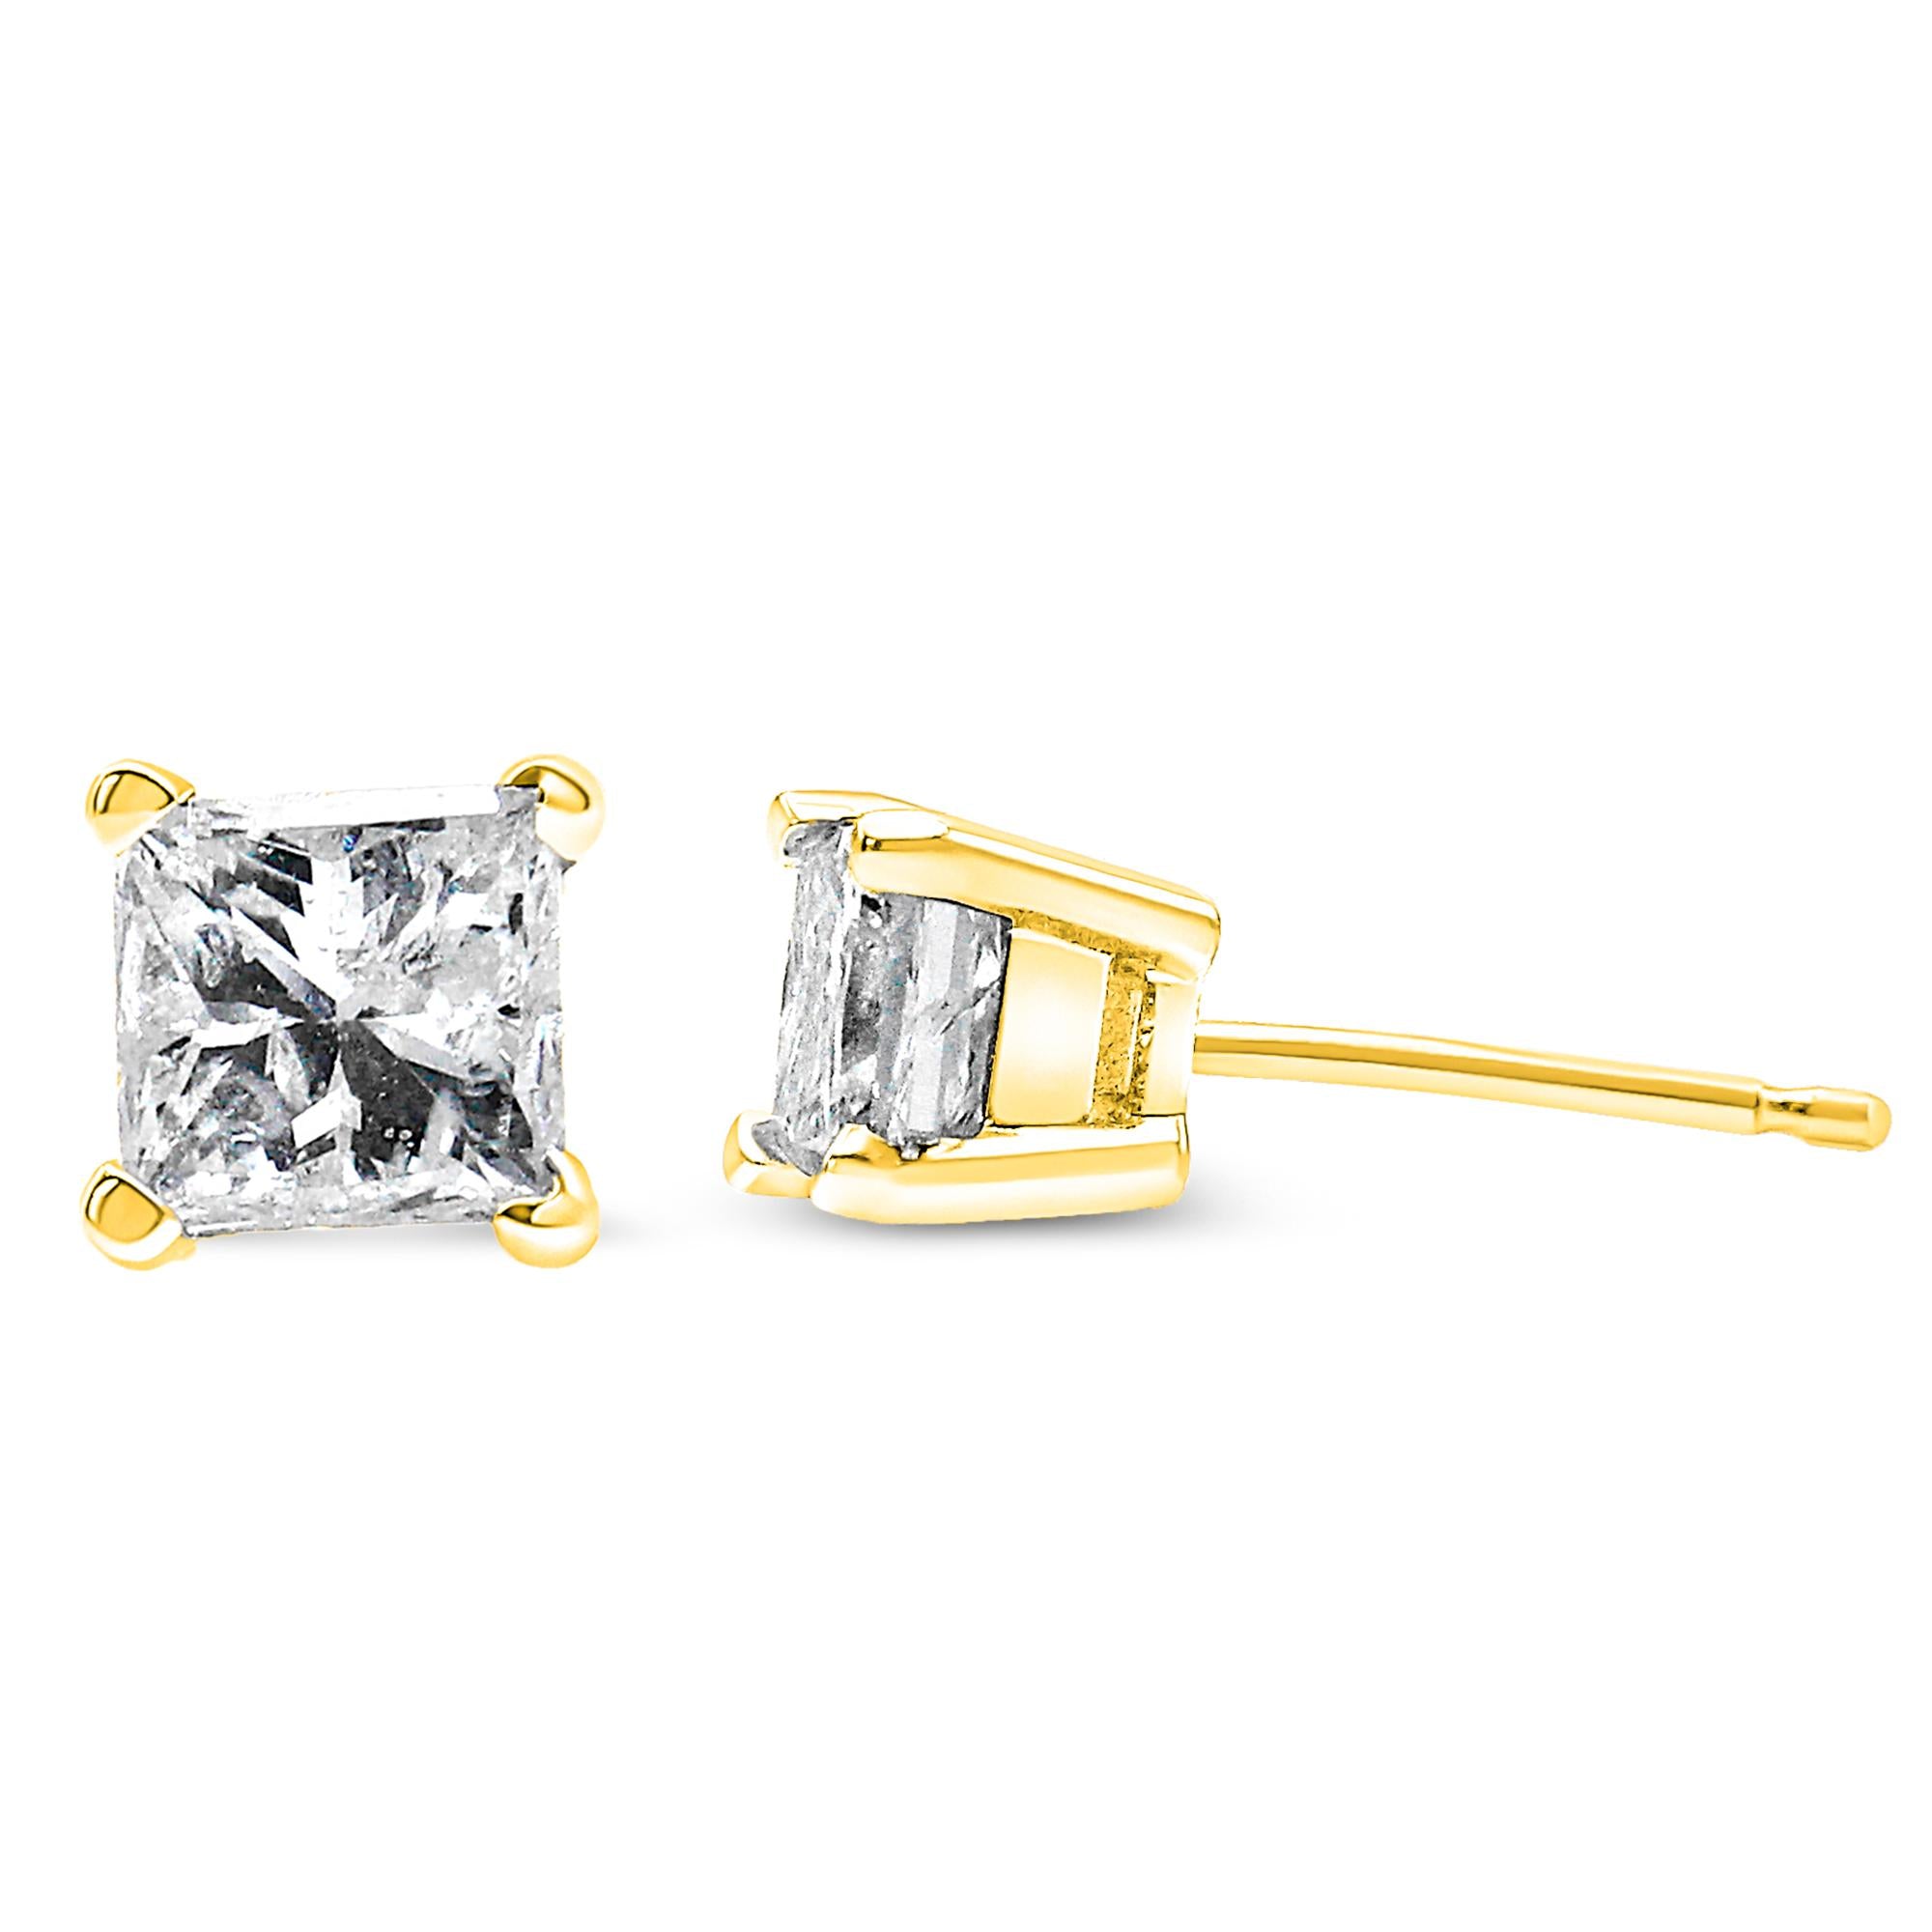 Introducing our Exquisite 14K Yellow Gold Princess-Cut Diamond Stud Earrings!